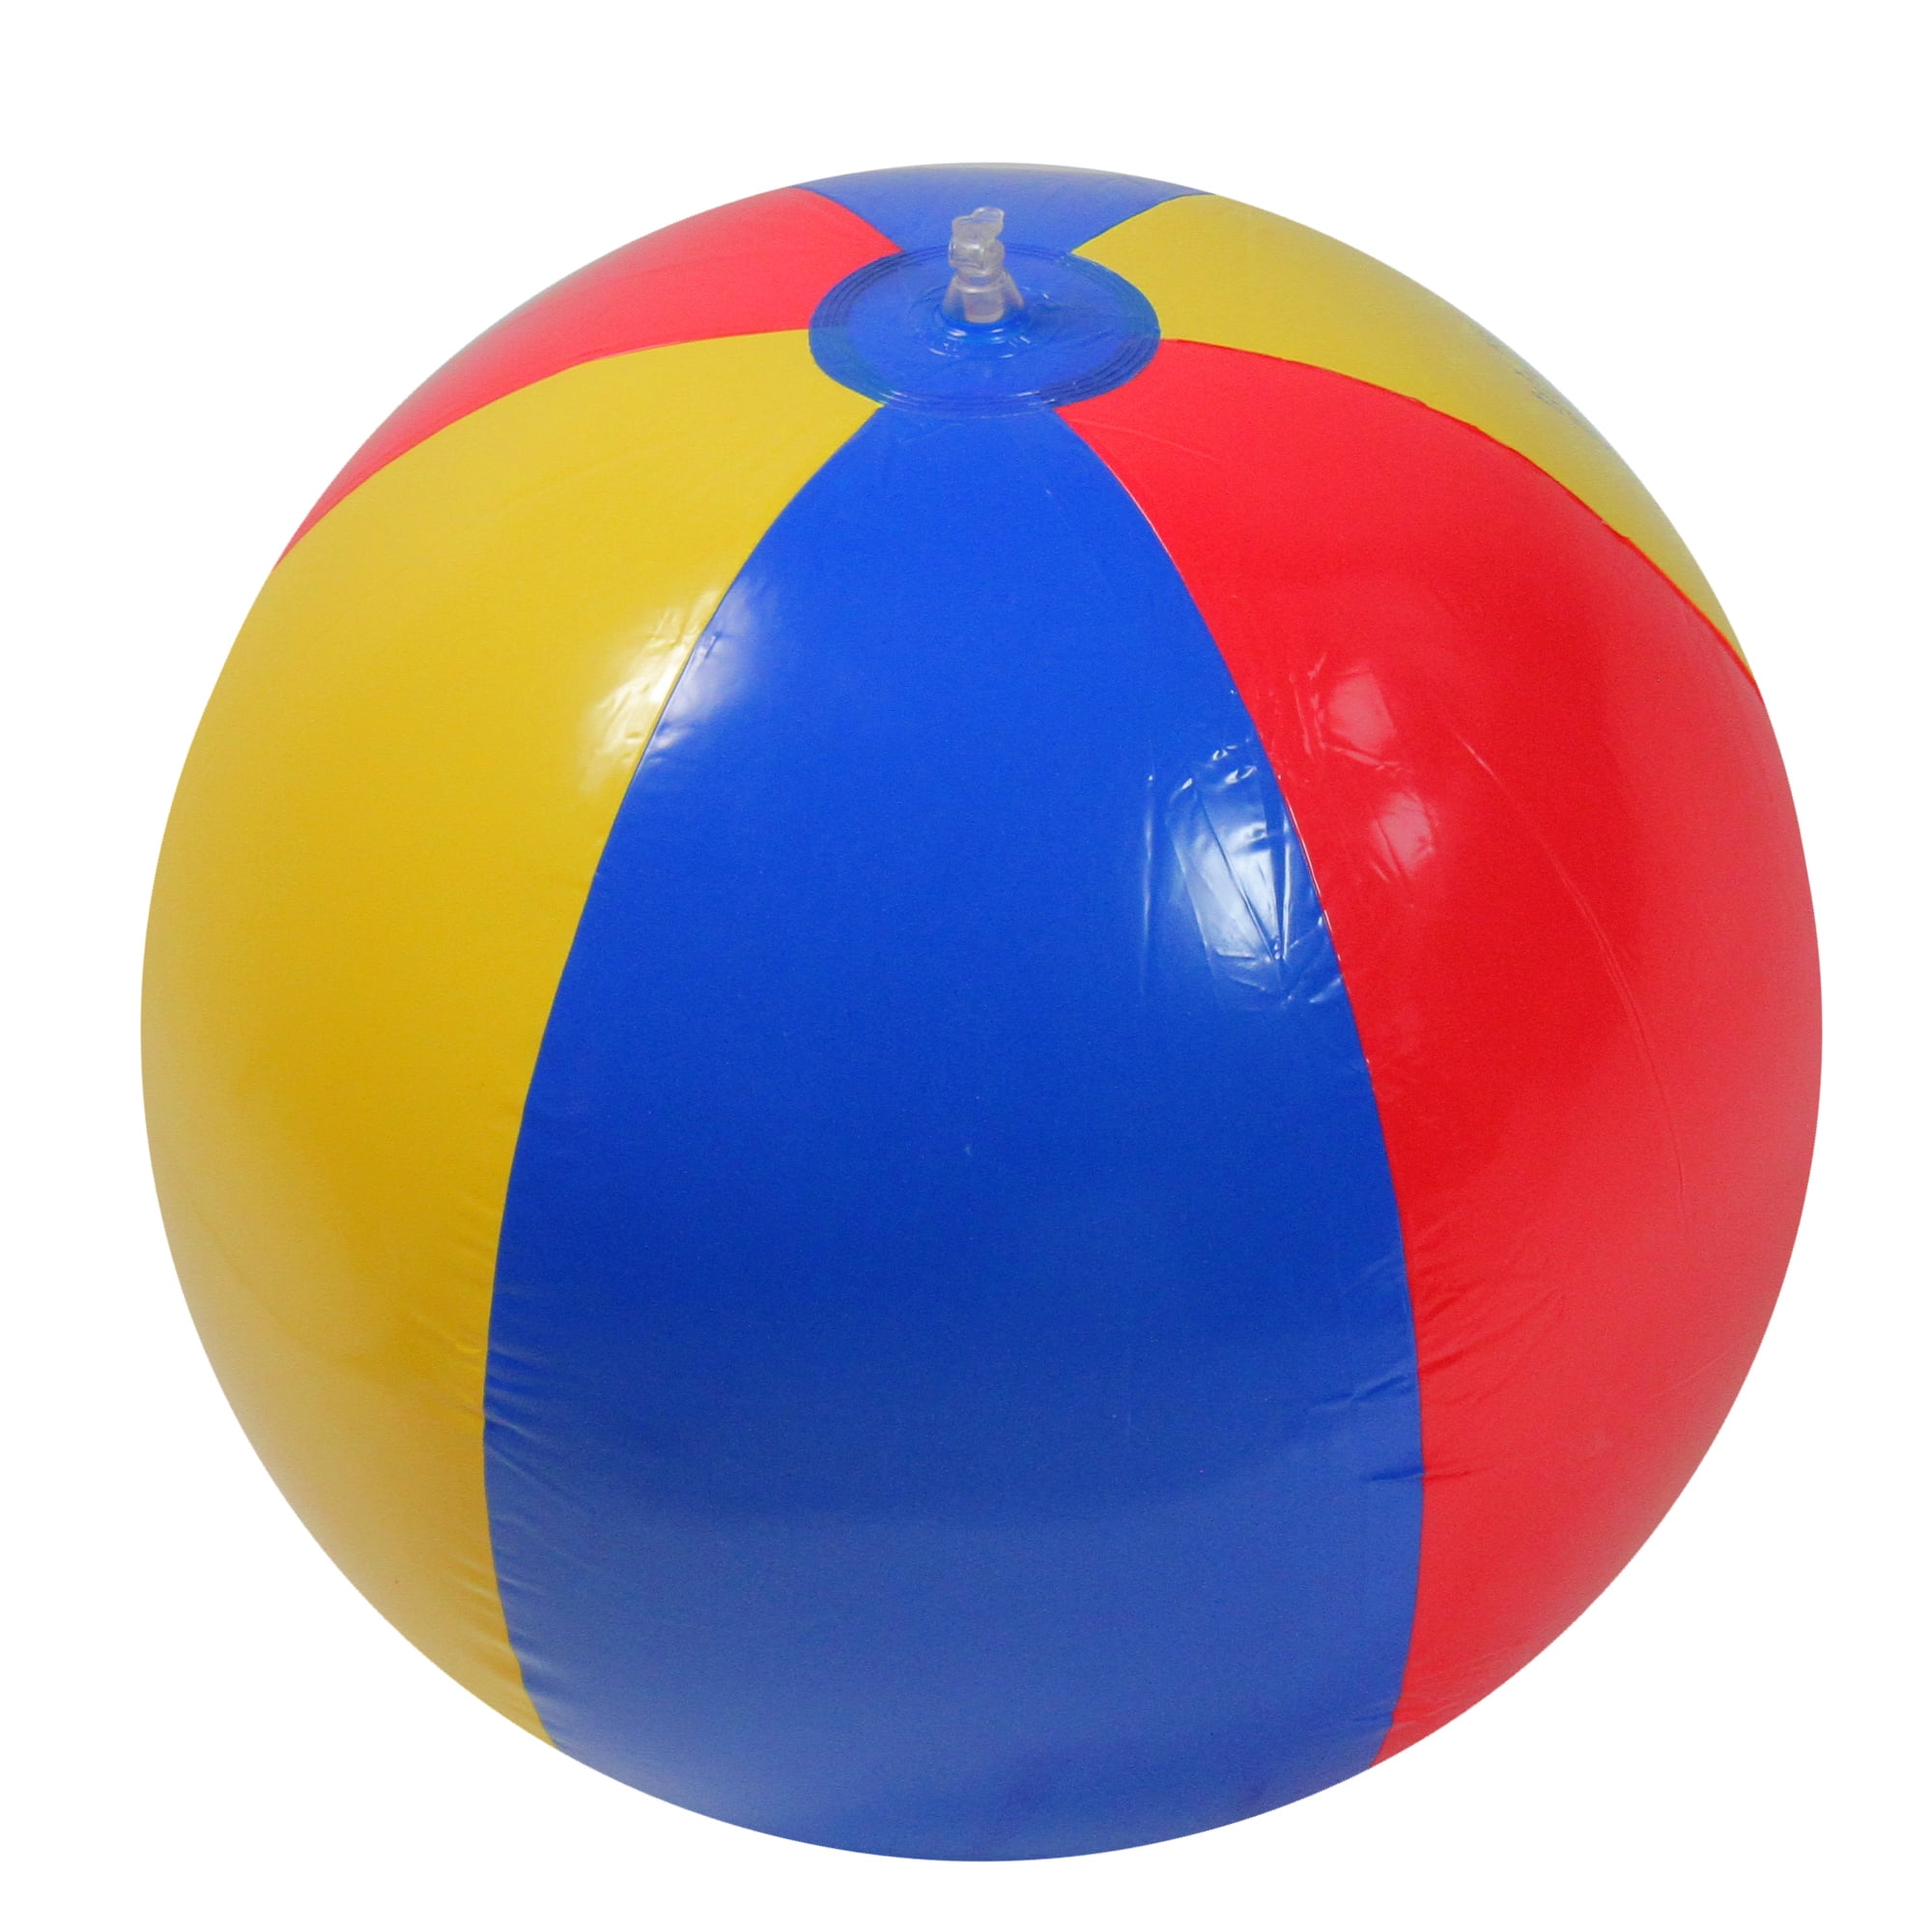 NEW Intex Giant Jumbo Ball Inflatable 42" Beach Pool Color Stripes Ages 3+ 